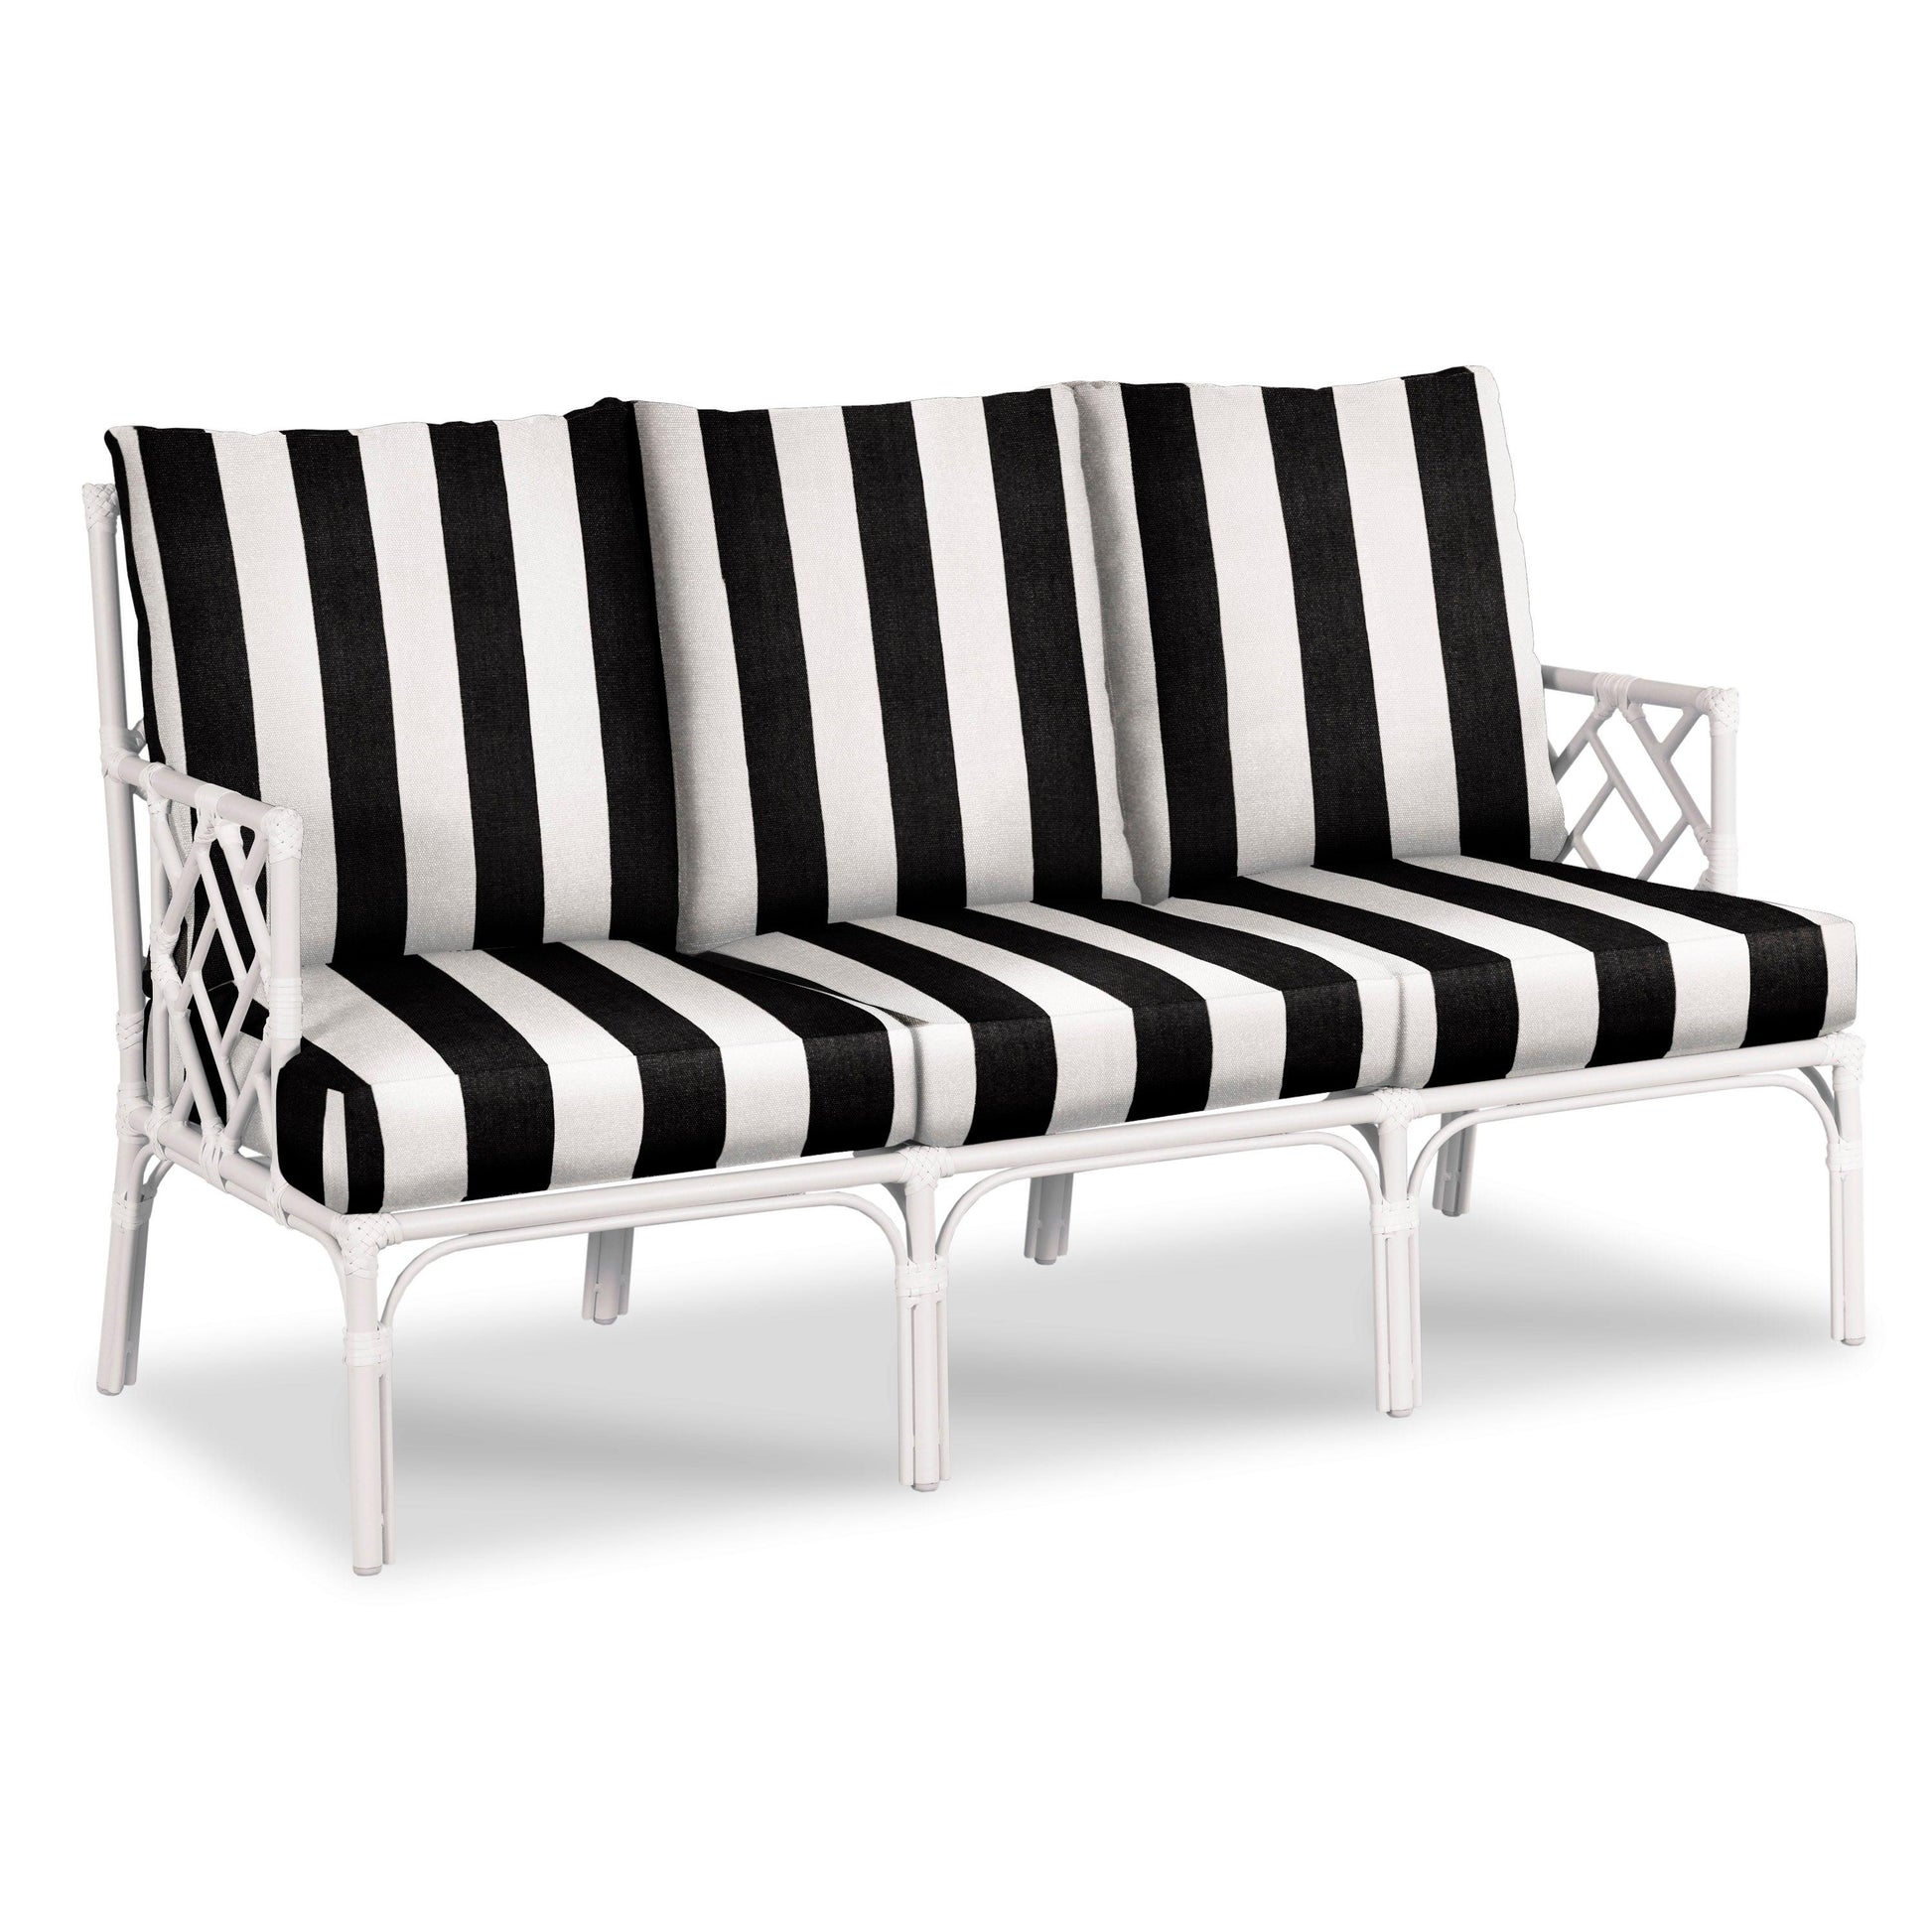 Carlyle Outdoor Sofa - Fairley Fancy 